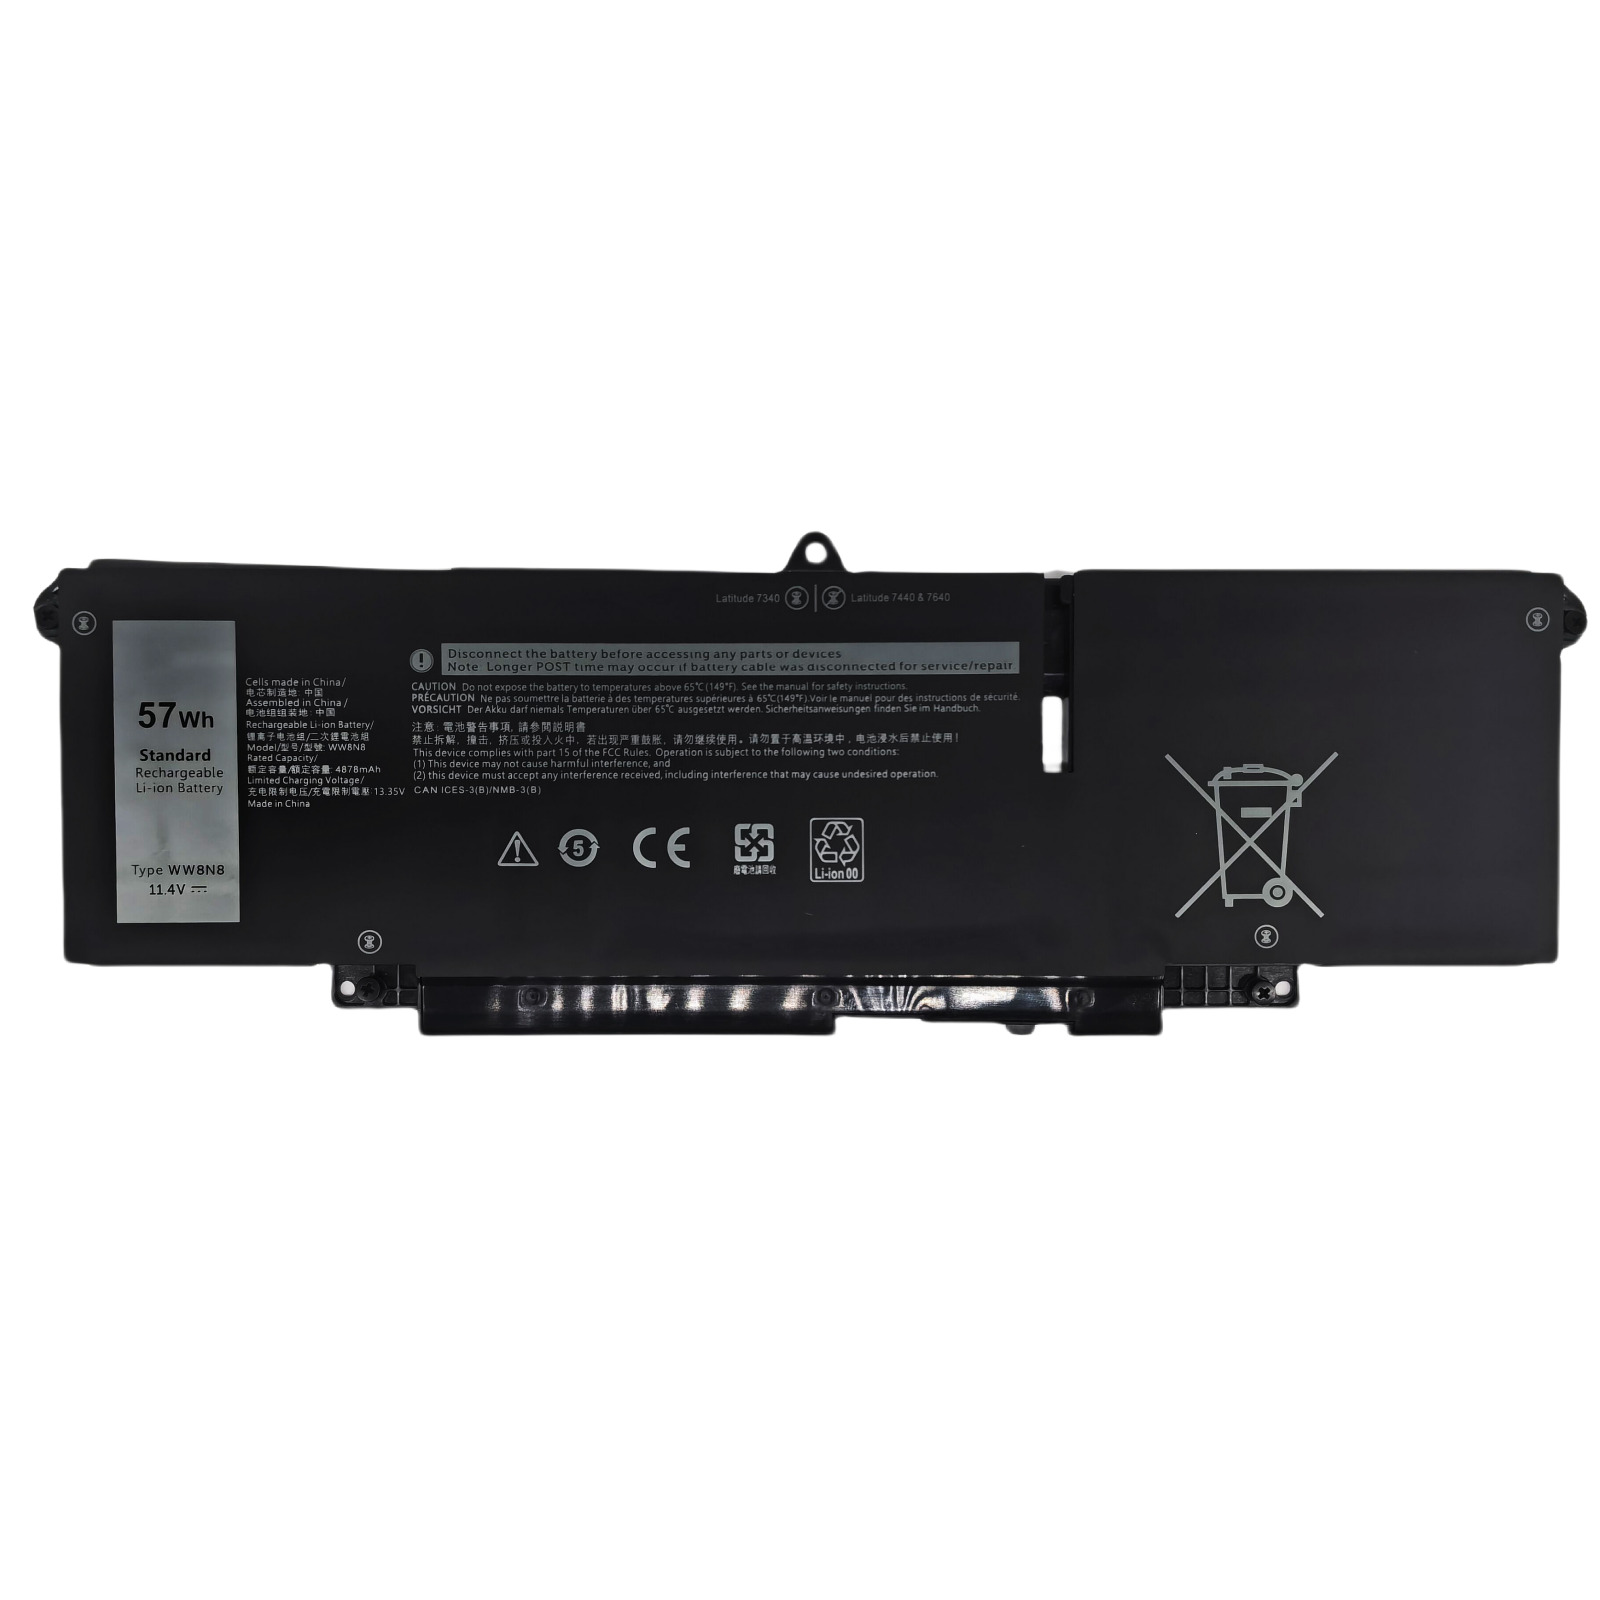 New WW8N8 57Wh Battery for Dell Latitude 7340 7440 7640 Series Notebook 047T0